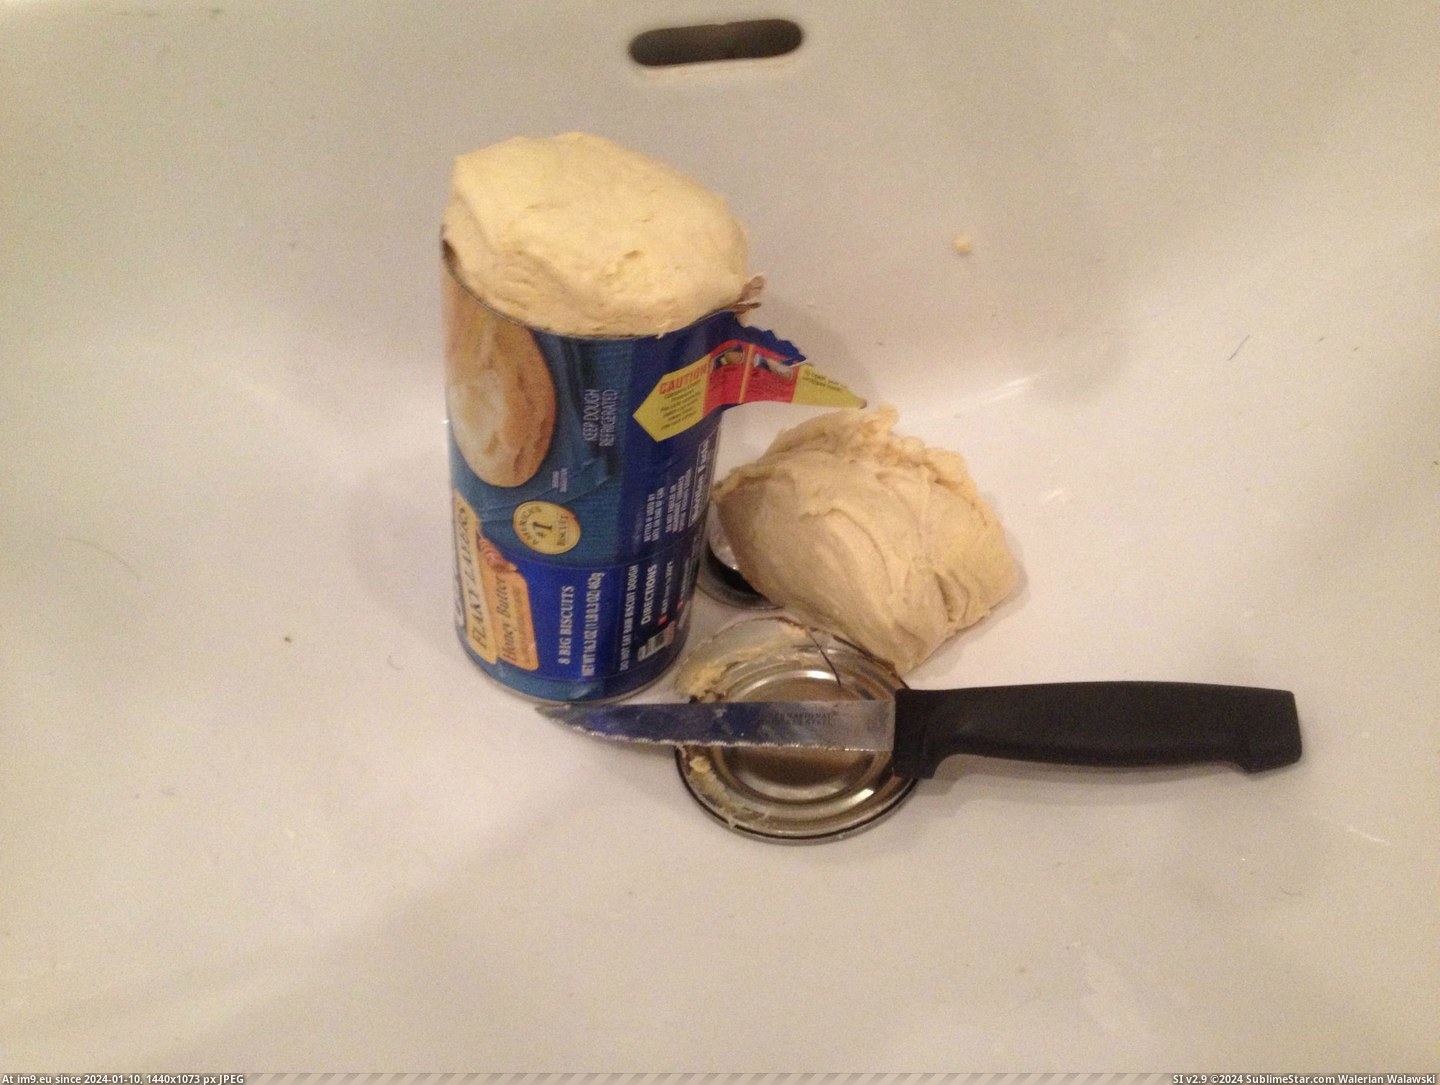 #Wtf #Can #Jerk #Grands #Pillsbury #Off #Redditor [Wtf] Redditor uses can of Pillsbury Grands to jerk off. [NSFW obviously] 2 Pic. (Изображение из альбом My r/WTF favs))